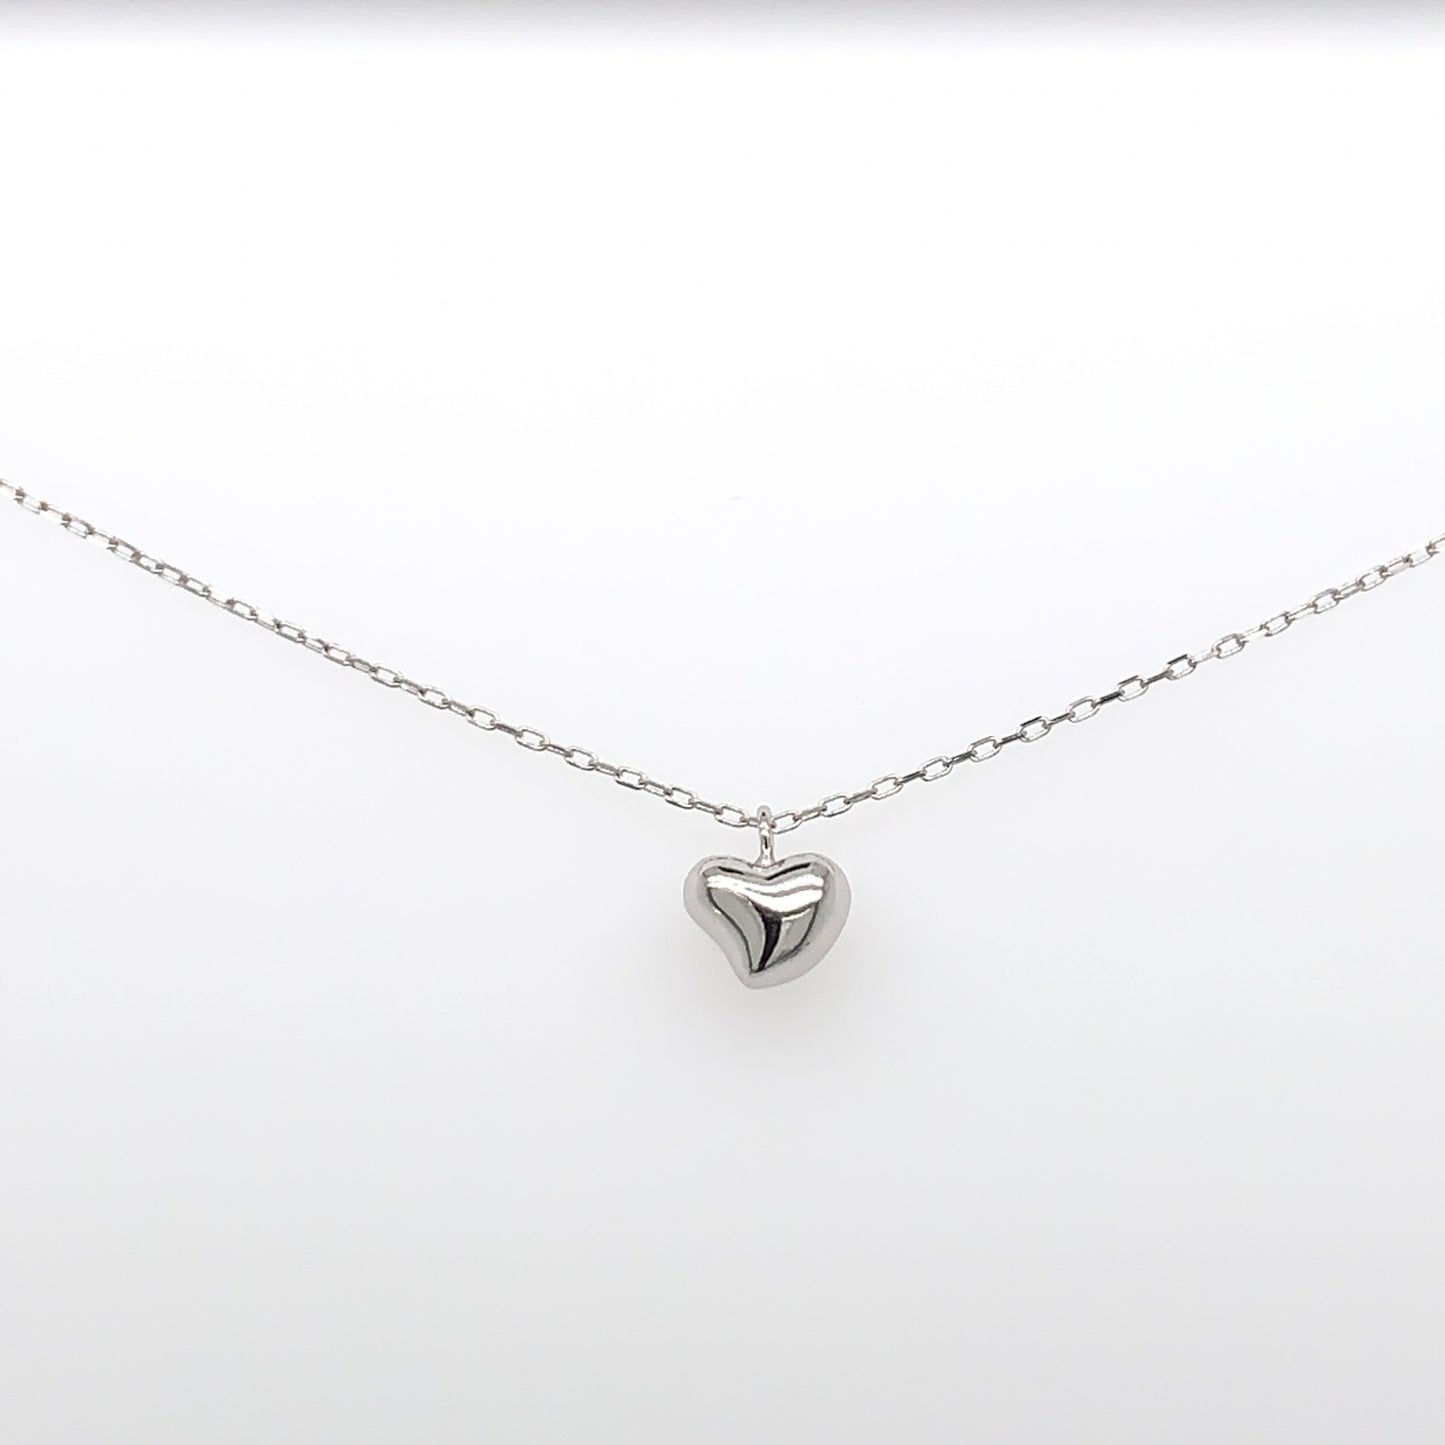 Gold Curved Heart Necklace